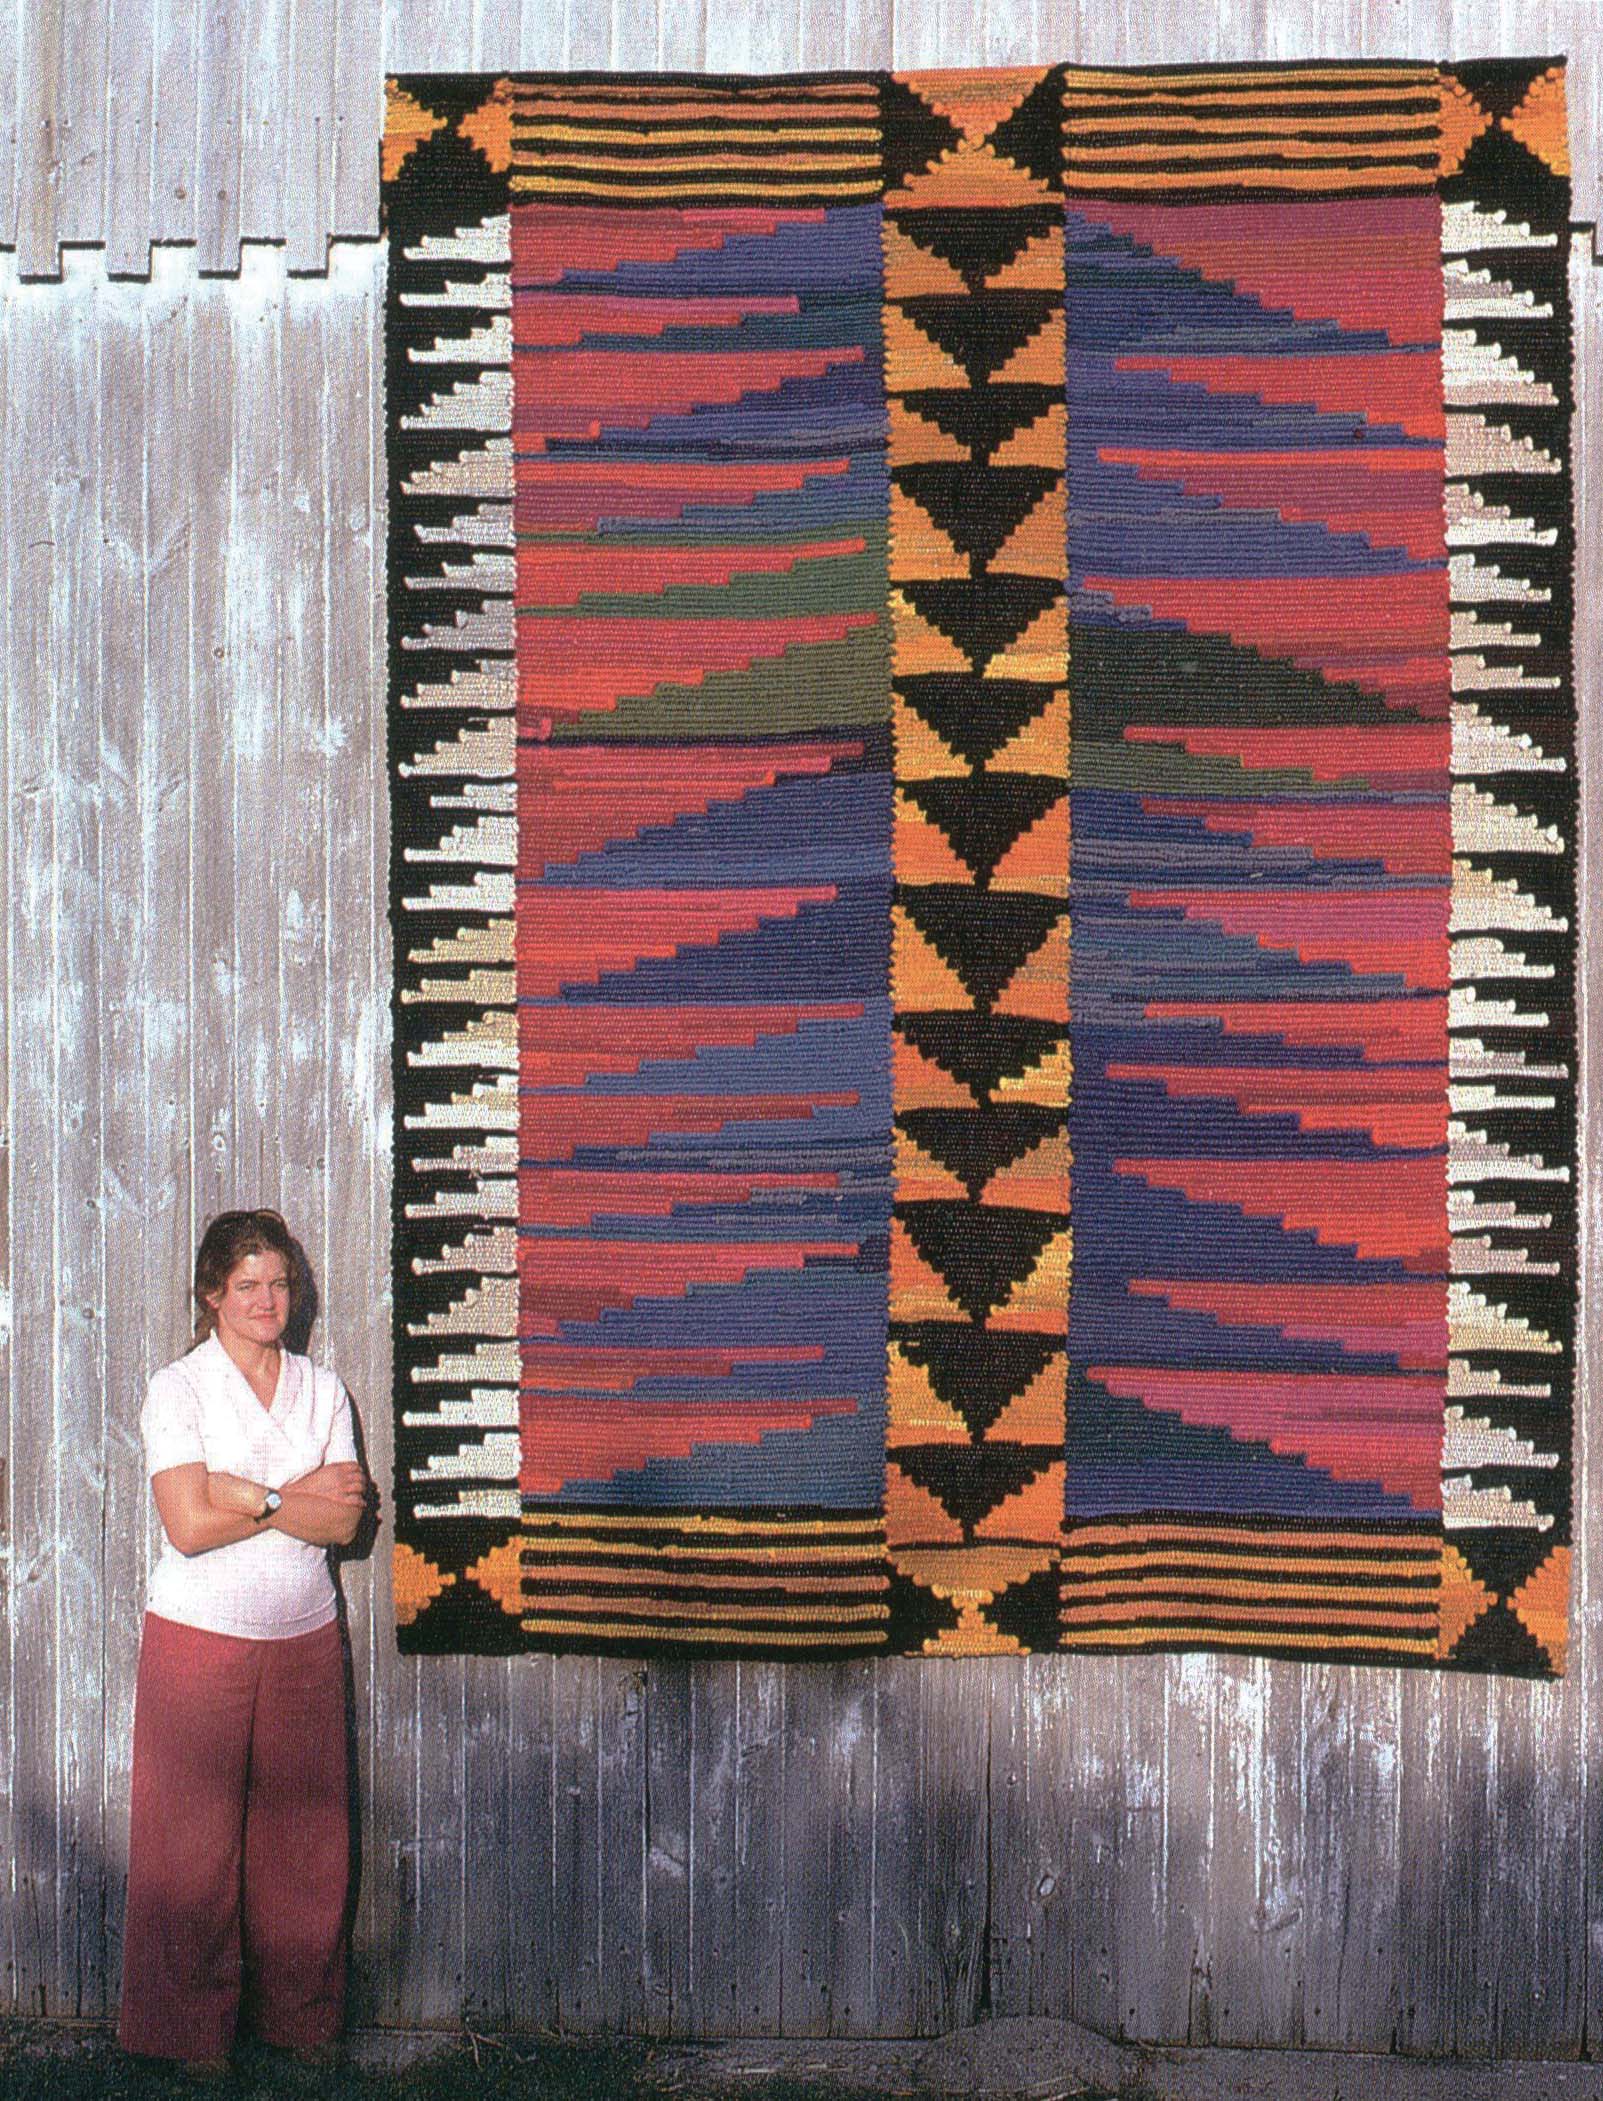 Nancy Crow is a modern quilt pioneer who has inspired generations of artists with her creativity. This picture was taken in 1974.